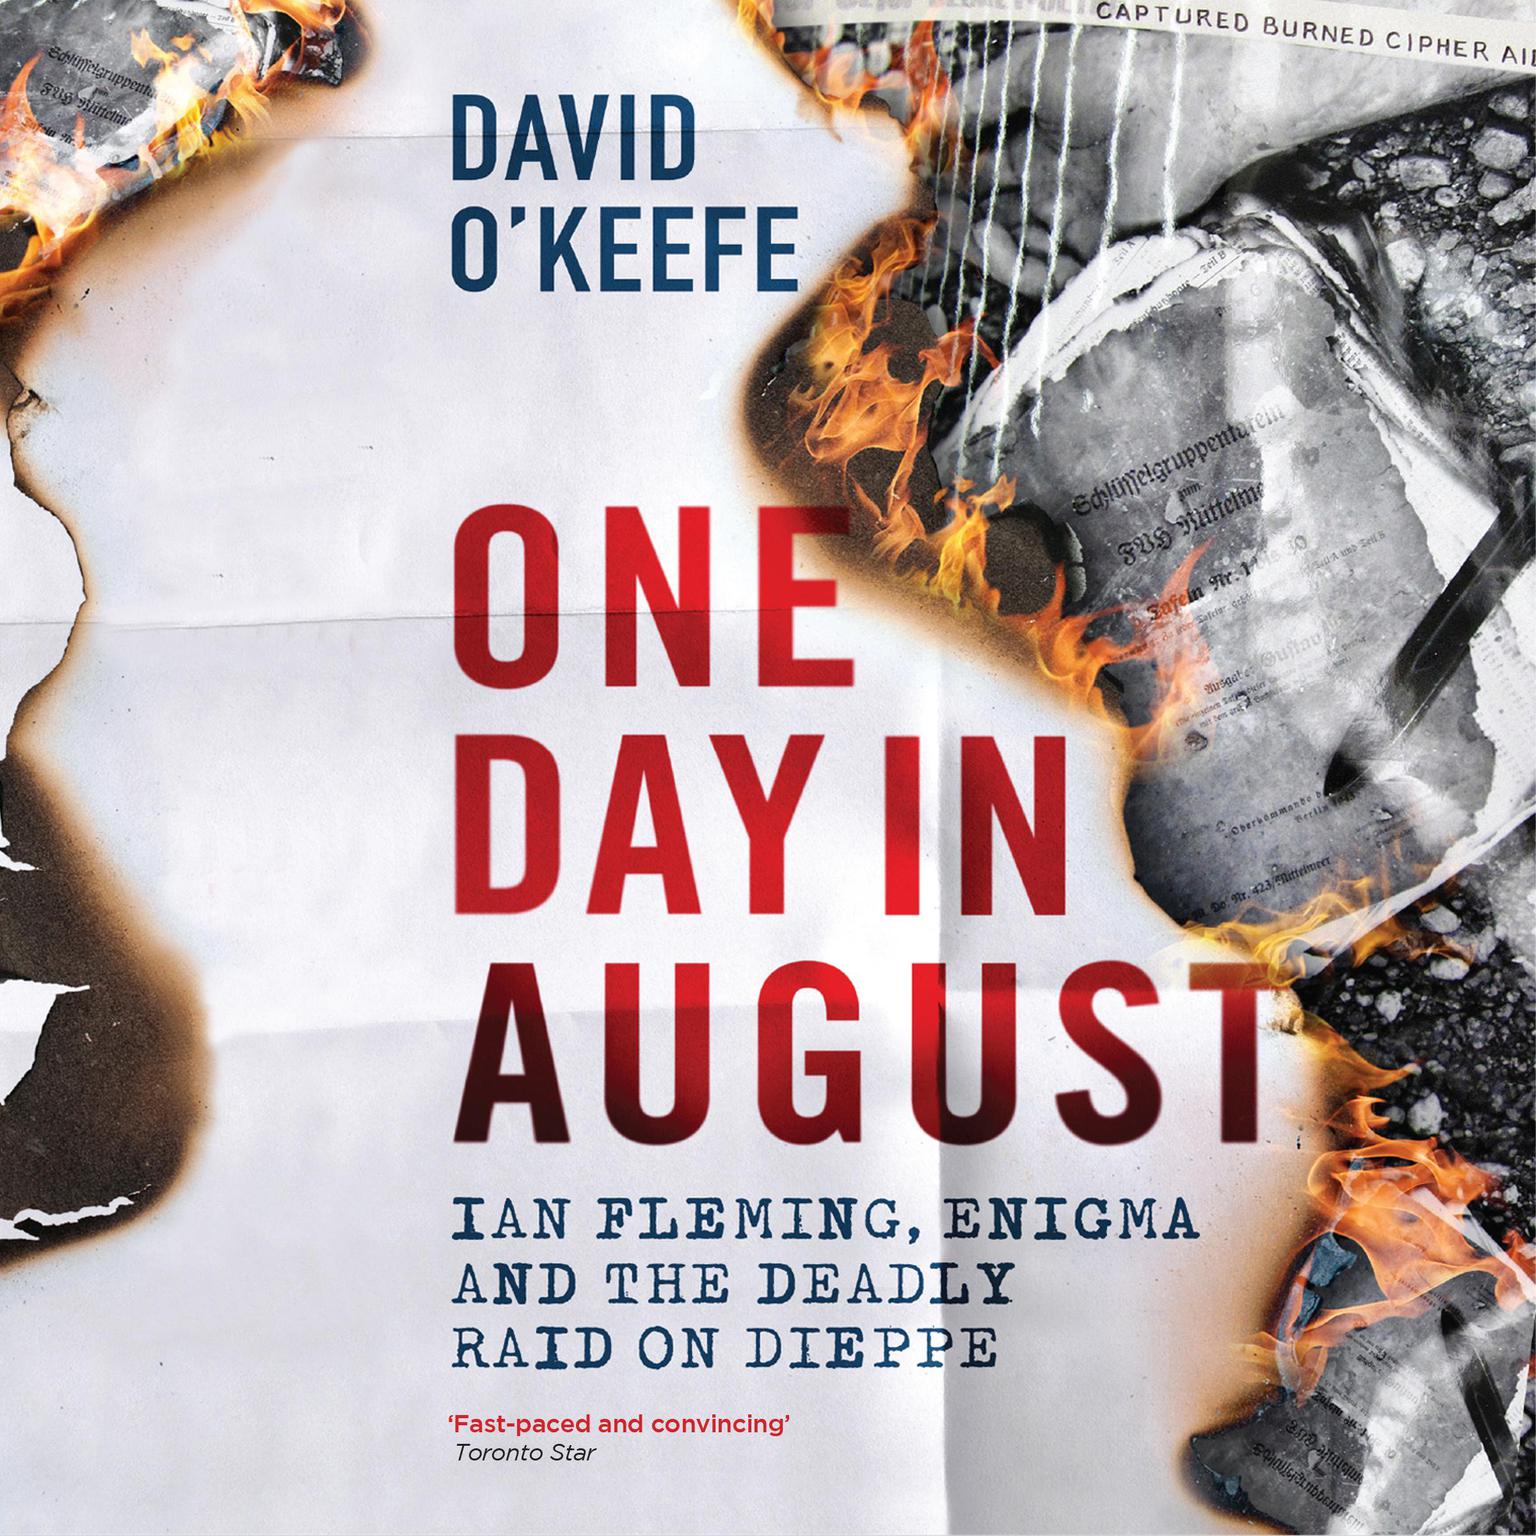 One Day In August: Ian Fleming, Enigma, and the Deadly Raid on Dieppe Audiobook, by David O'Keefe